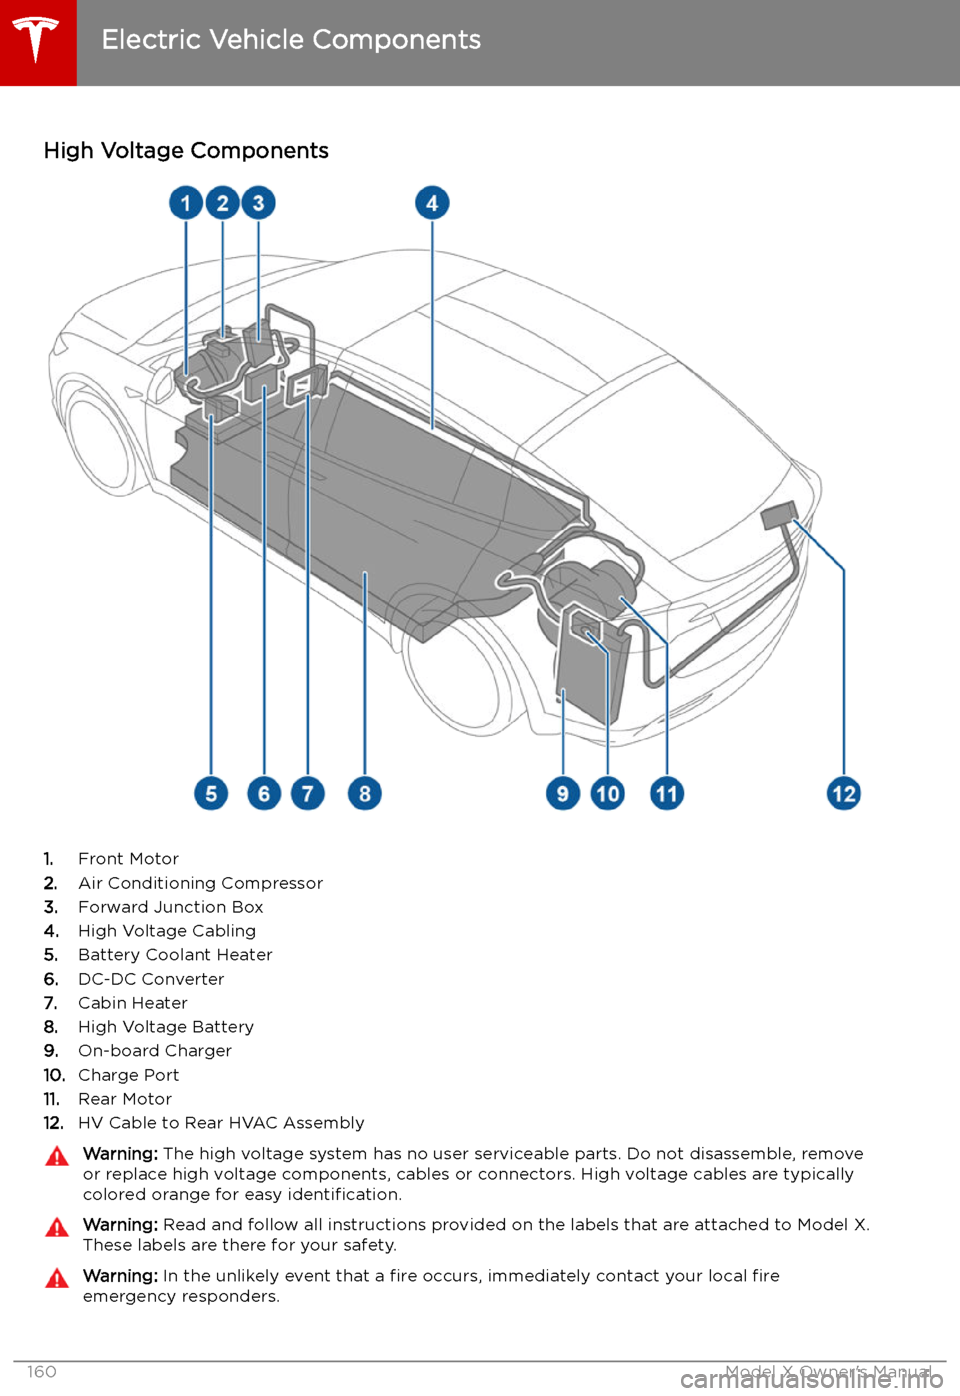 TESLA MODEL X 2019  Owners Manual  Charging
Electric Vehicle Components
High Voltage Components
1. Front Motor
2. Air Conditioning Compressor
3. Forward Junction Box
4. High Voltage Cabling
5. Battery Coolant Heater
6. DC-DC Converter
